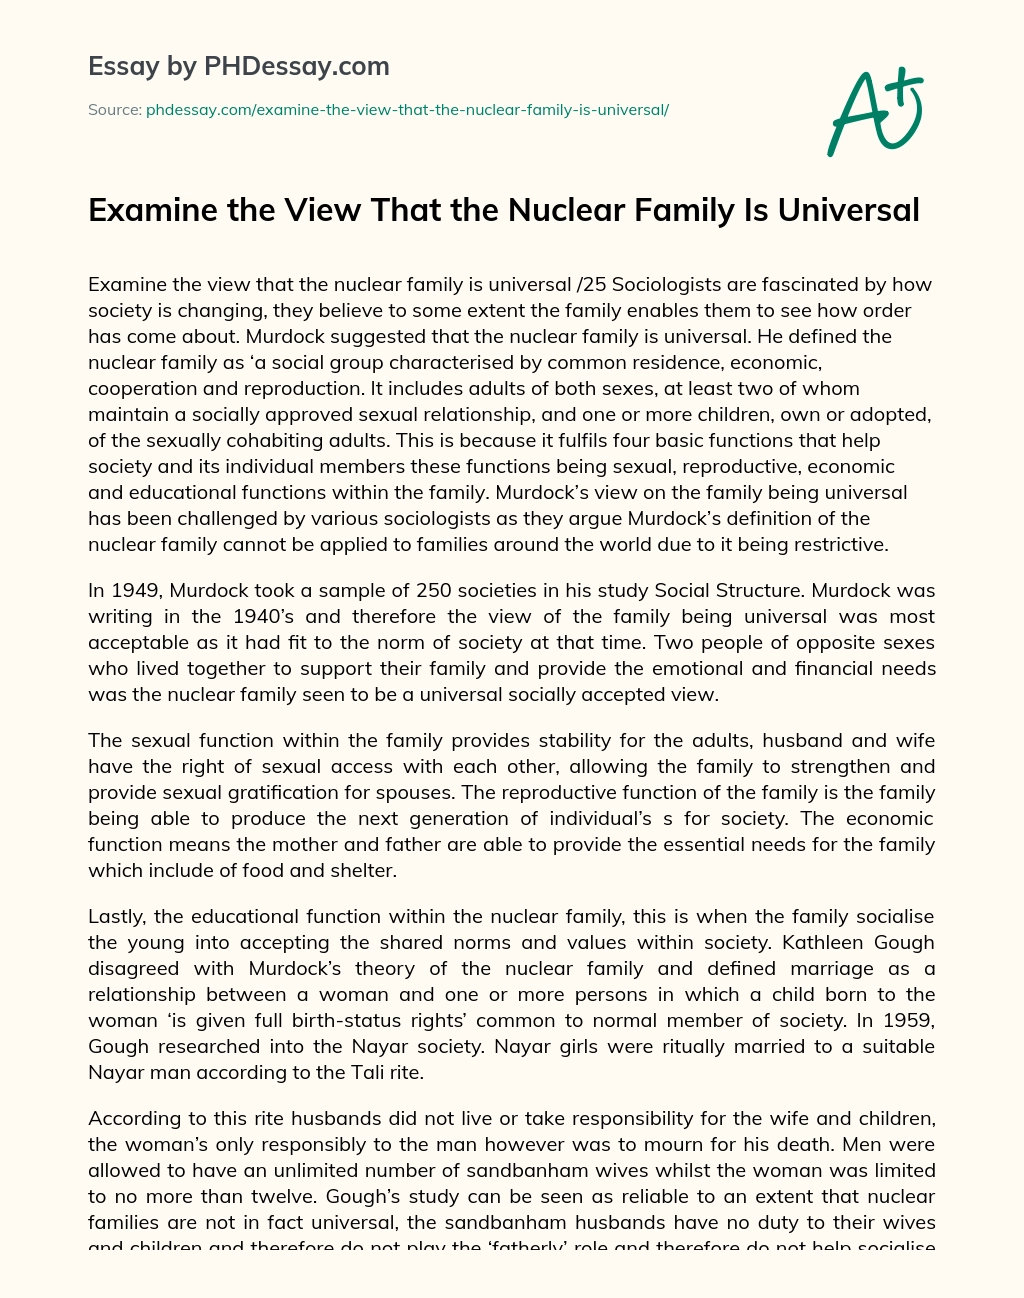 Examine the View That the Nuclear Family Is Universal essay